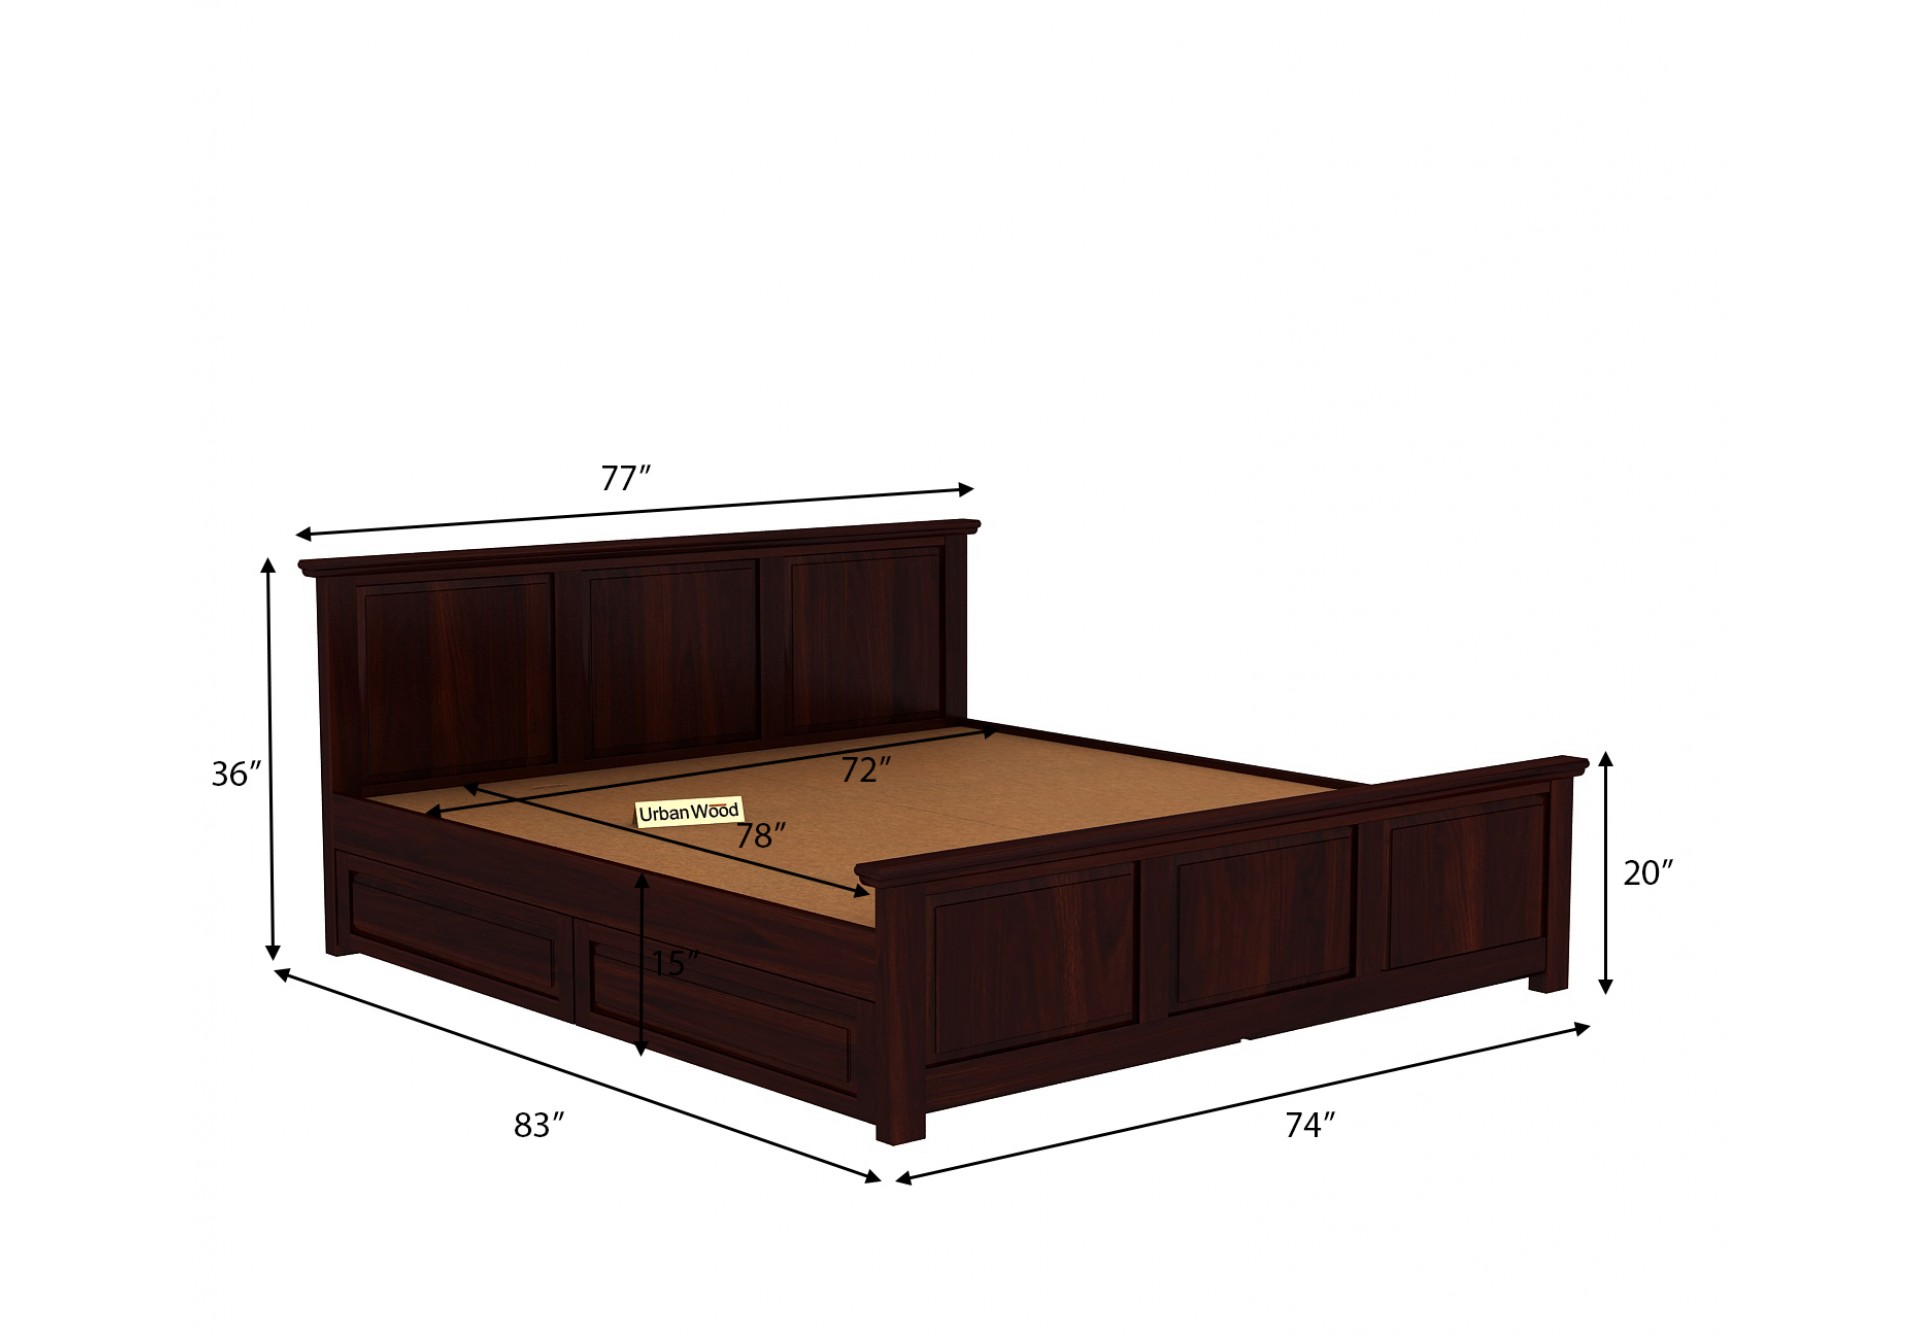 Babson Bed With Storage ( Queen Size, Walnut Finish )